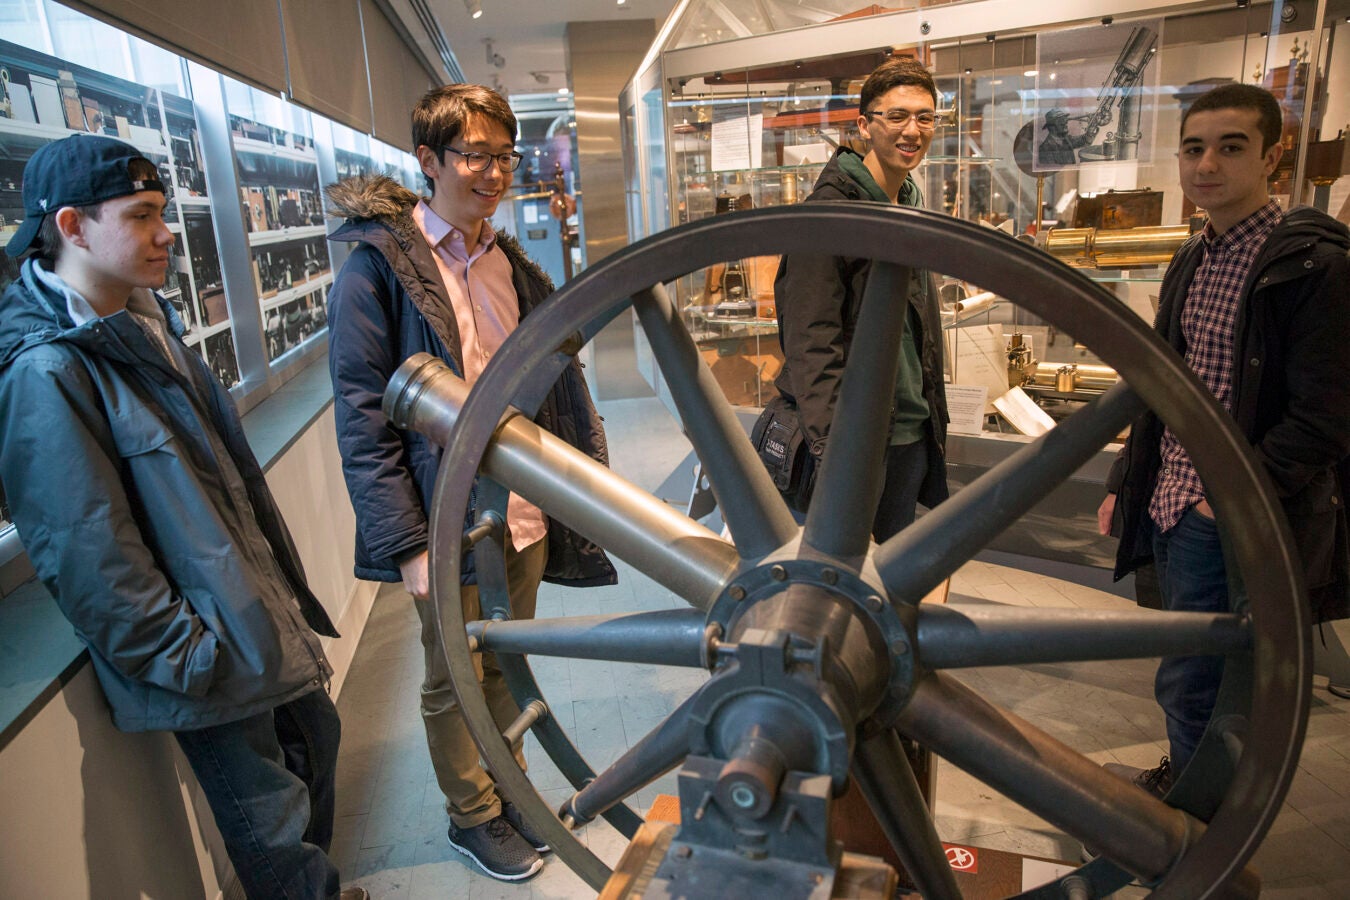 Roommates, Clifford "Scotty" Courvoisier, Kenneth Shinozuka, Sung Ahn, and Abdelrhman "Abdul" Saleh, (from far rear left to right), All class of '20 who live in Holworthy Hall, view a "Transit Circle" inside The Collection of Historical Scientific Instruments in the Science Center.